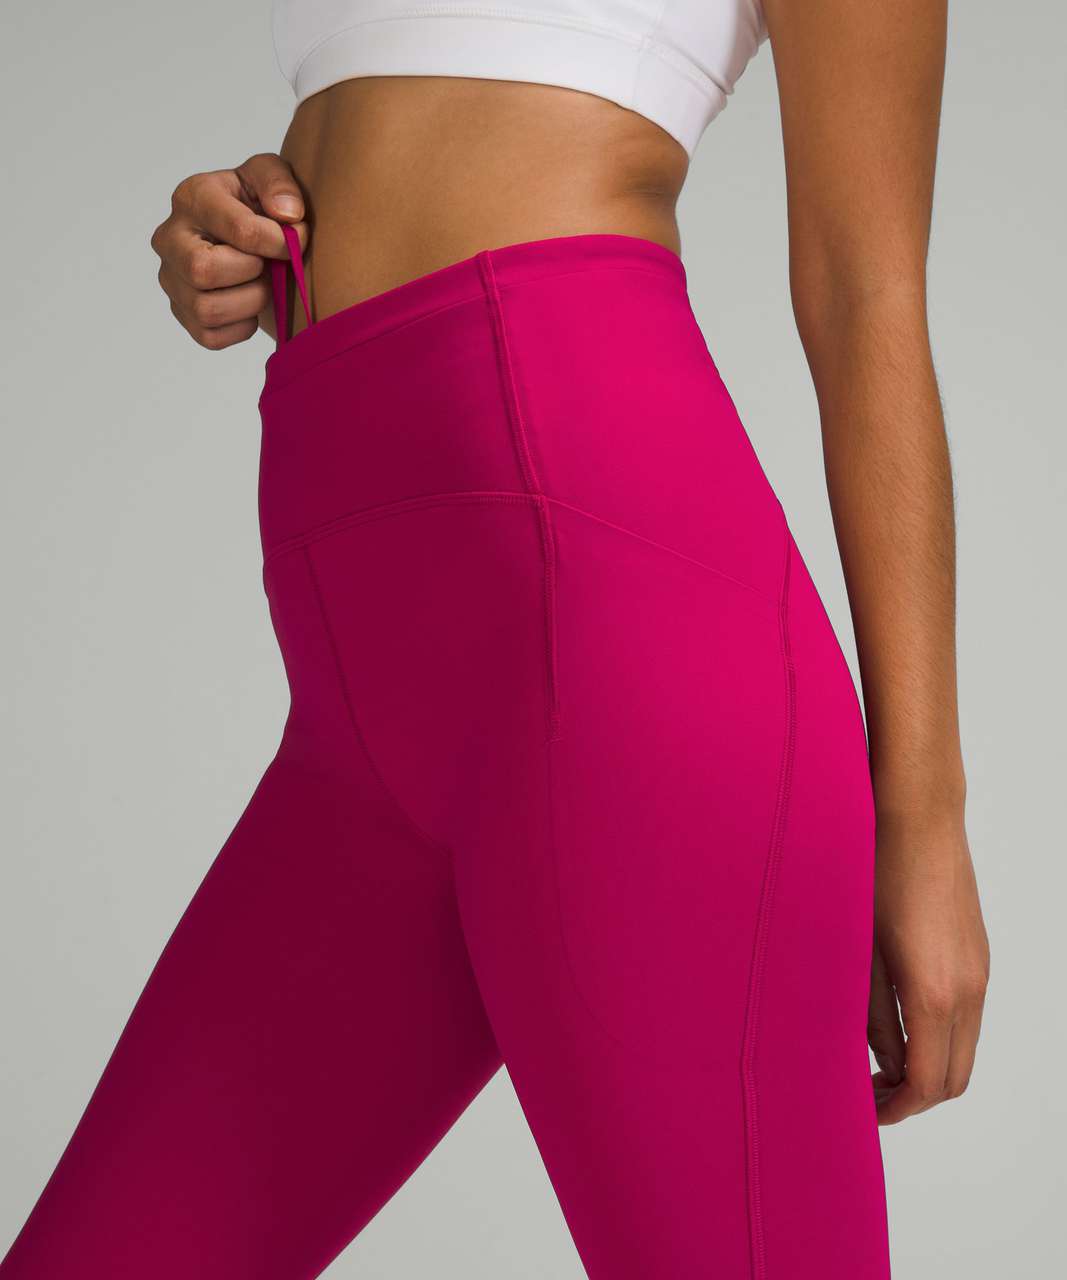 NWT Lululemon Swift Speed High-Rise HR Tight 28 Sonic Pink Neon Wash Size  6.